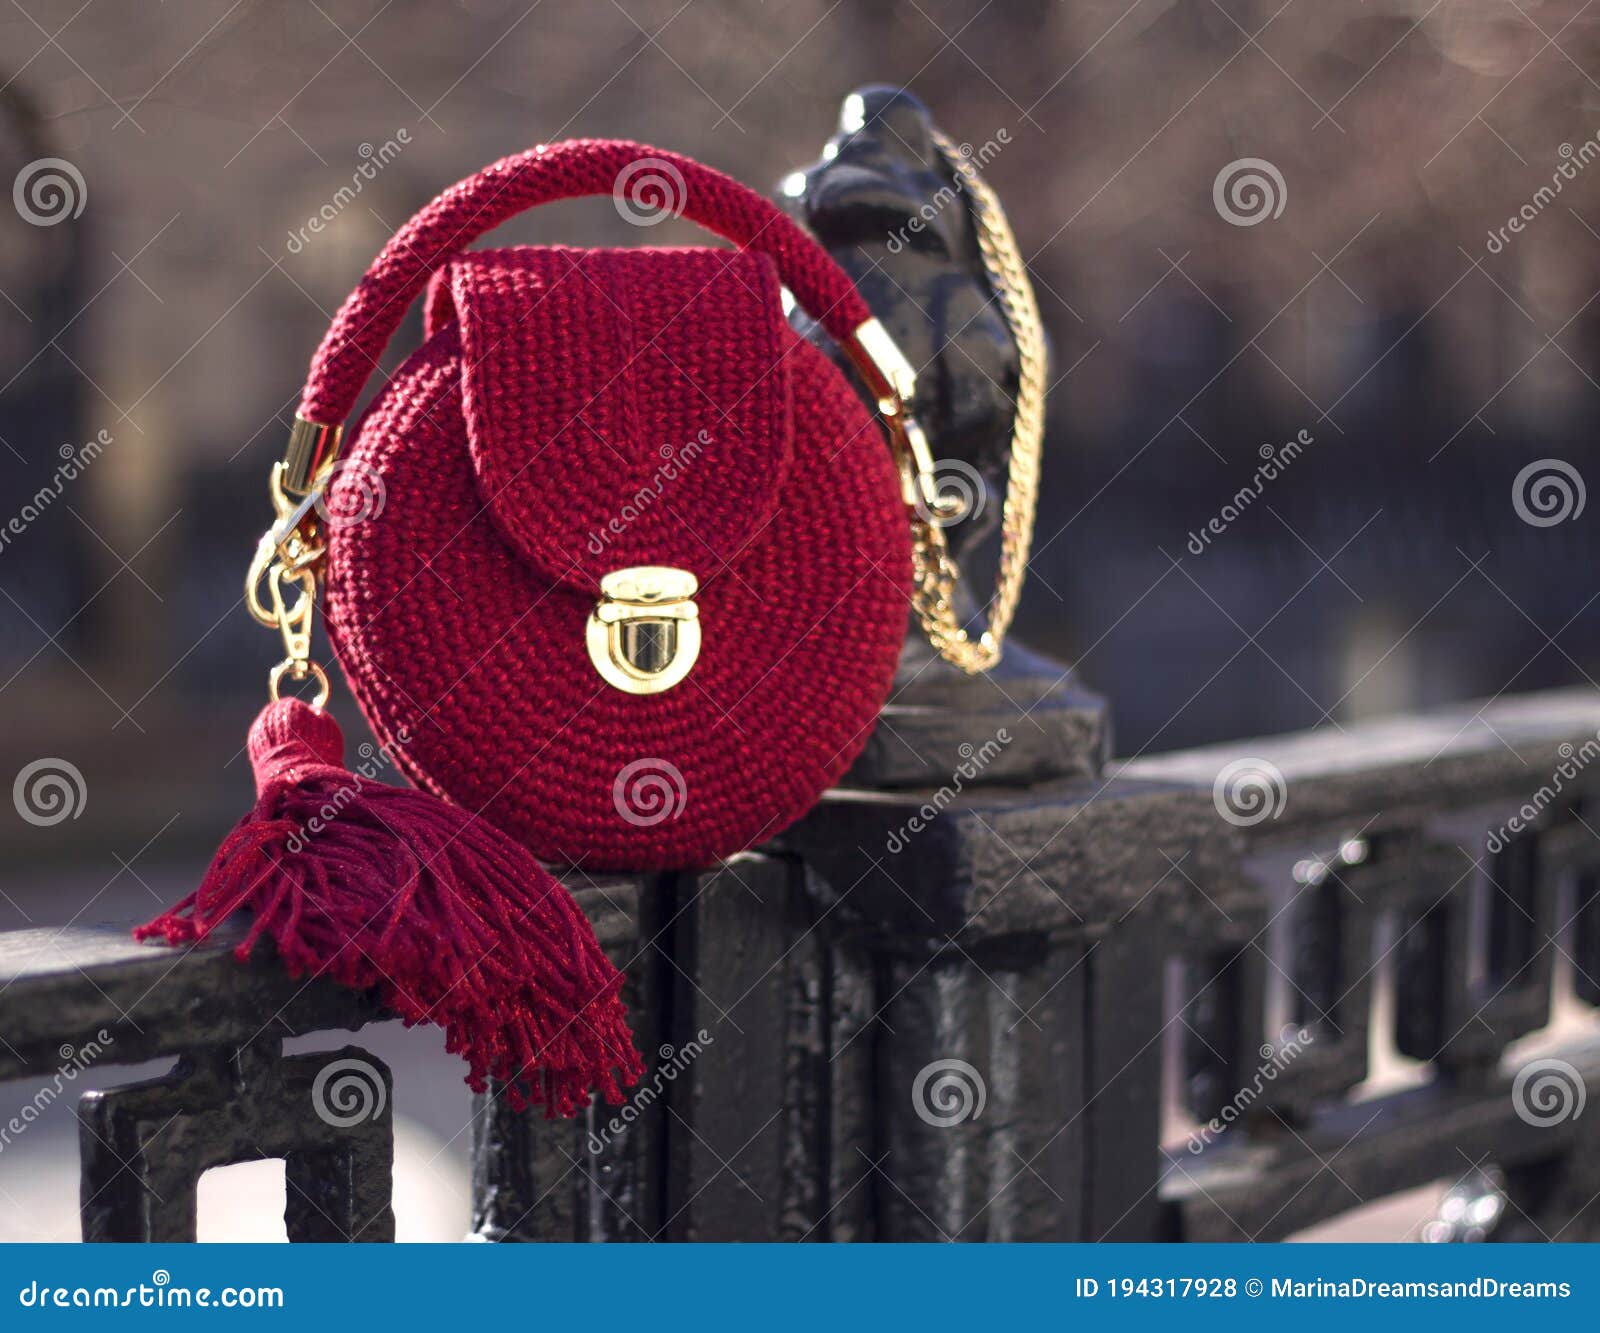 handmade red textile knitted bag with shiny threads